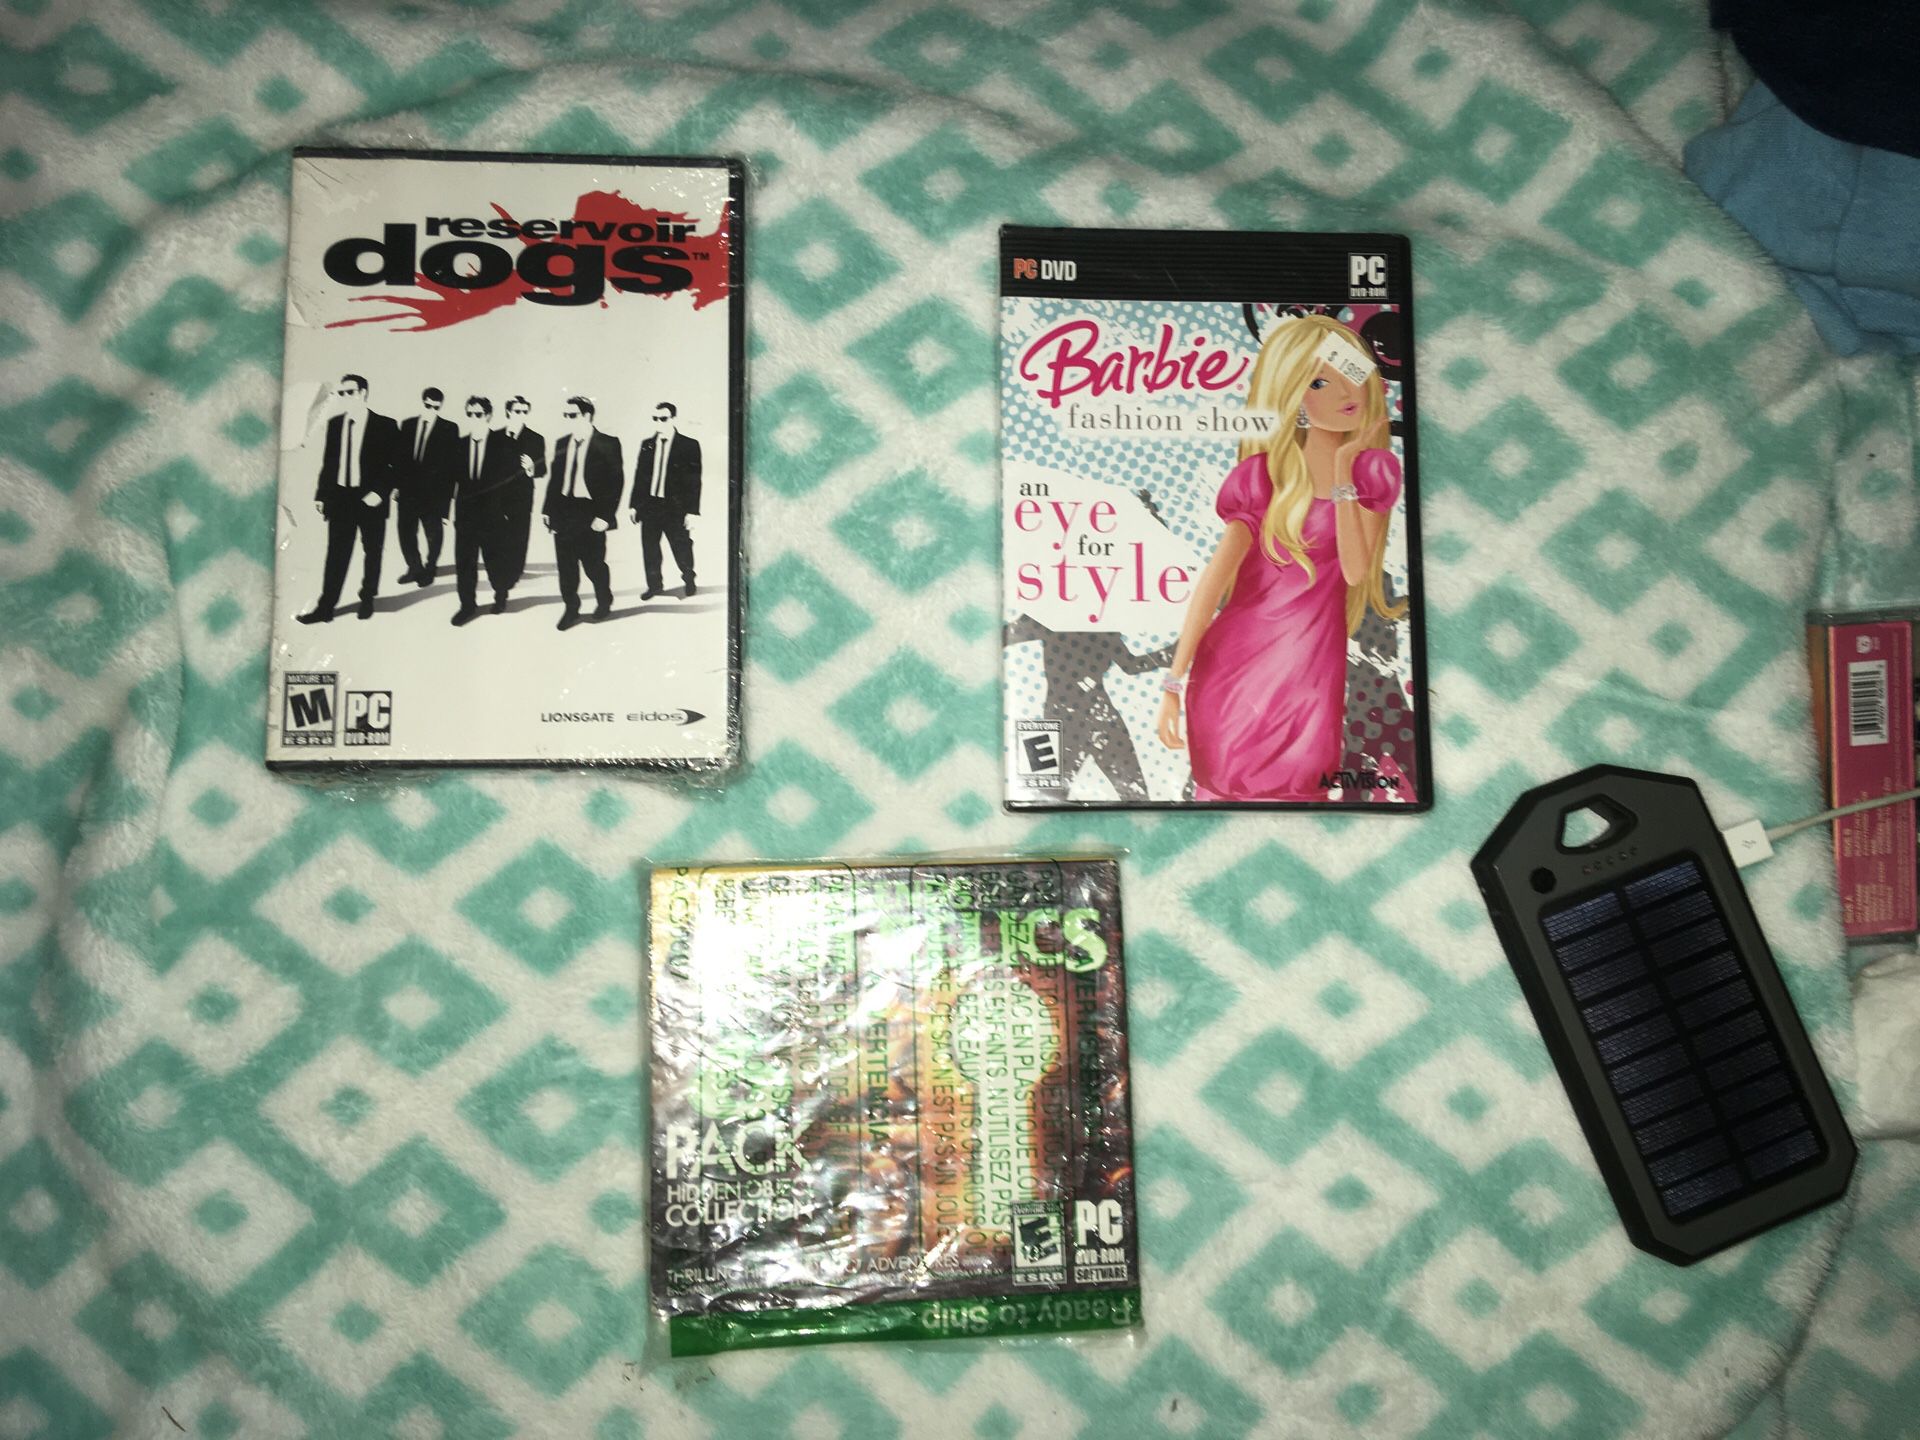 New PC games reservoir dogs & Barbie